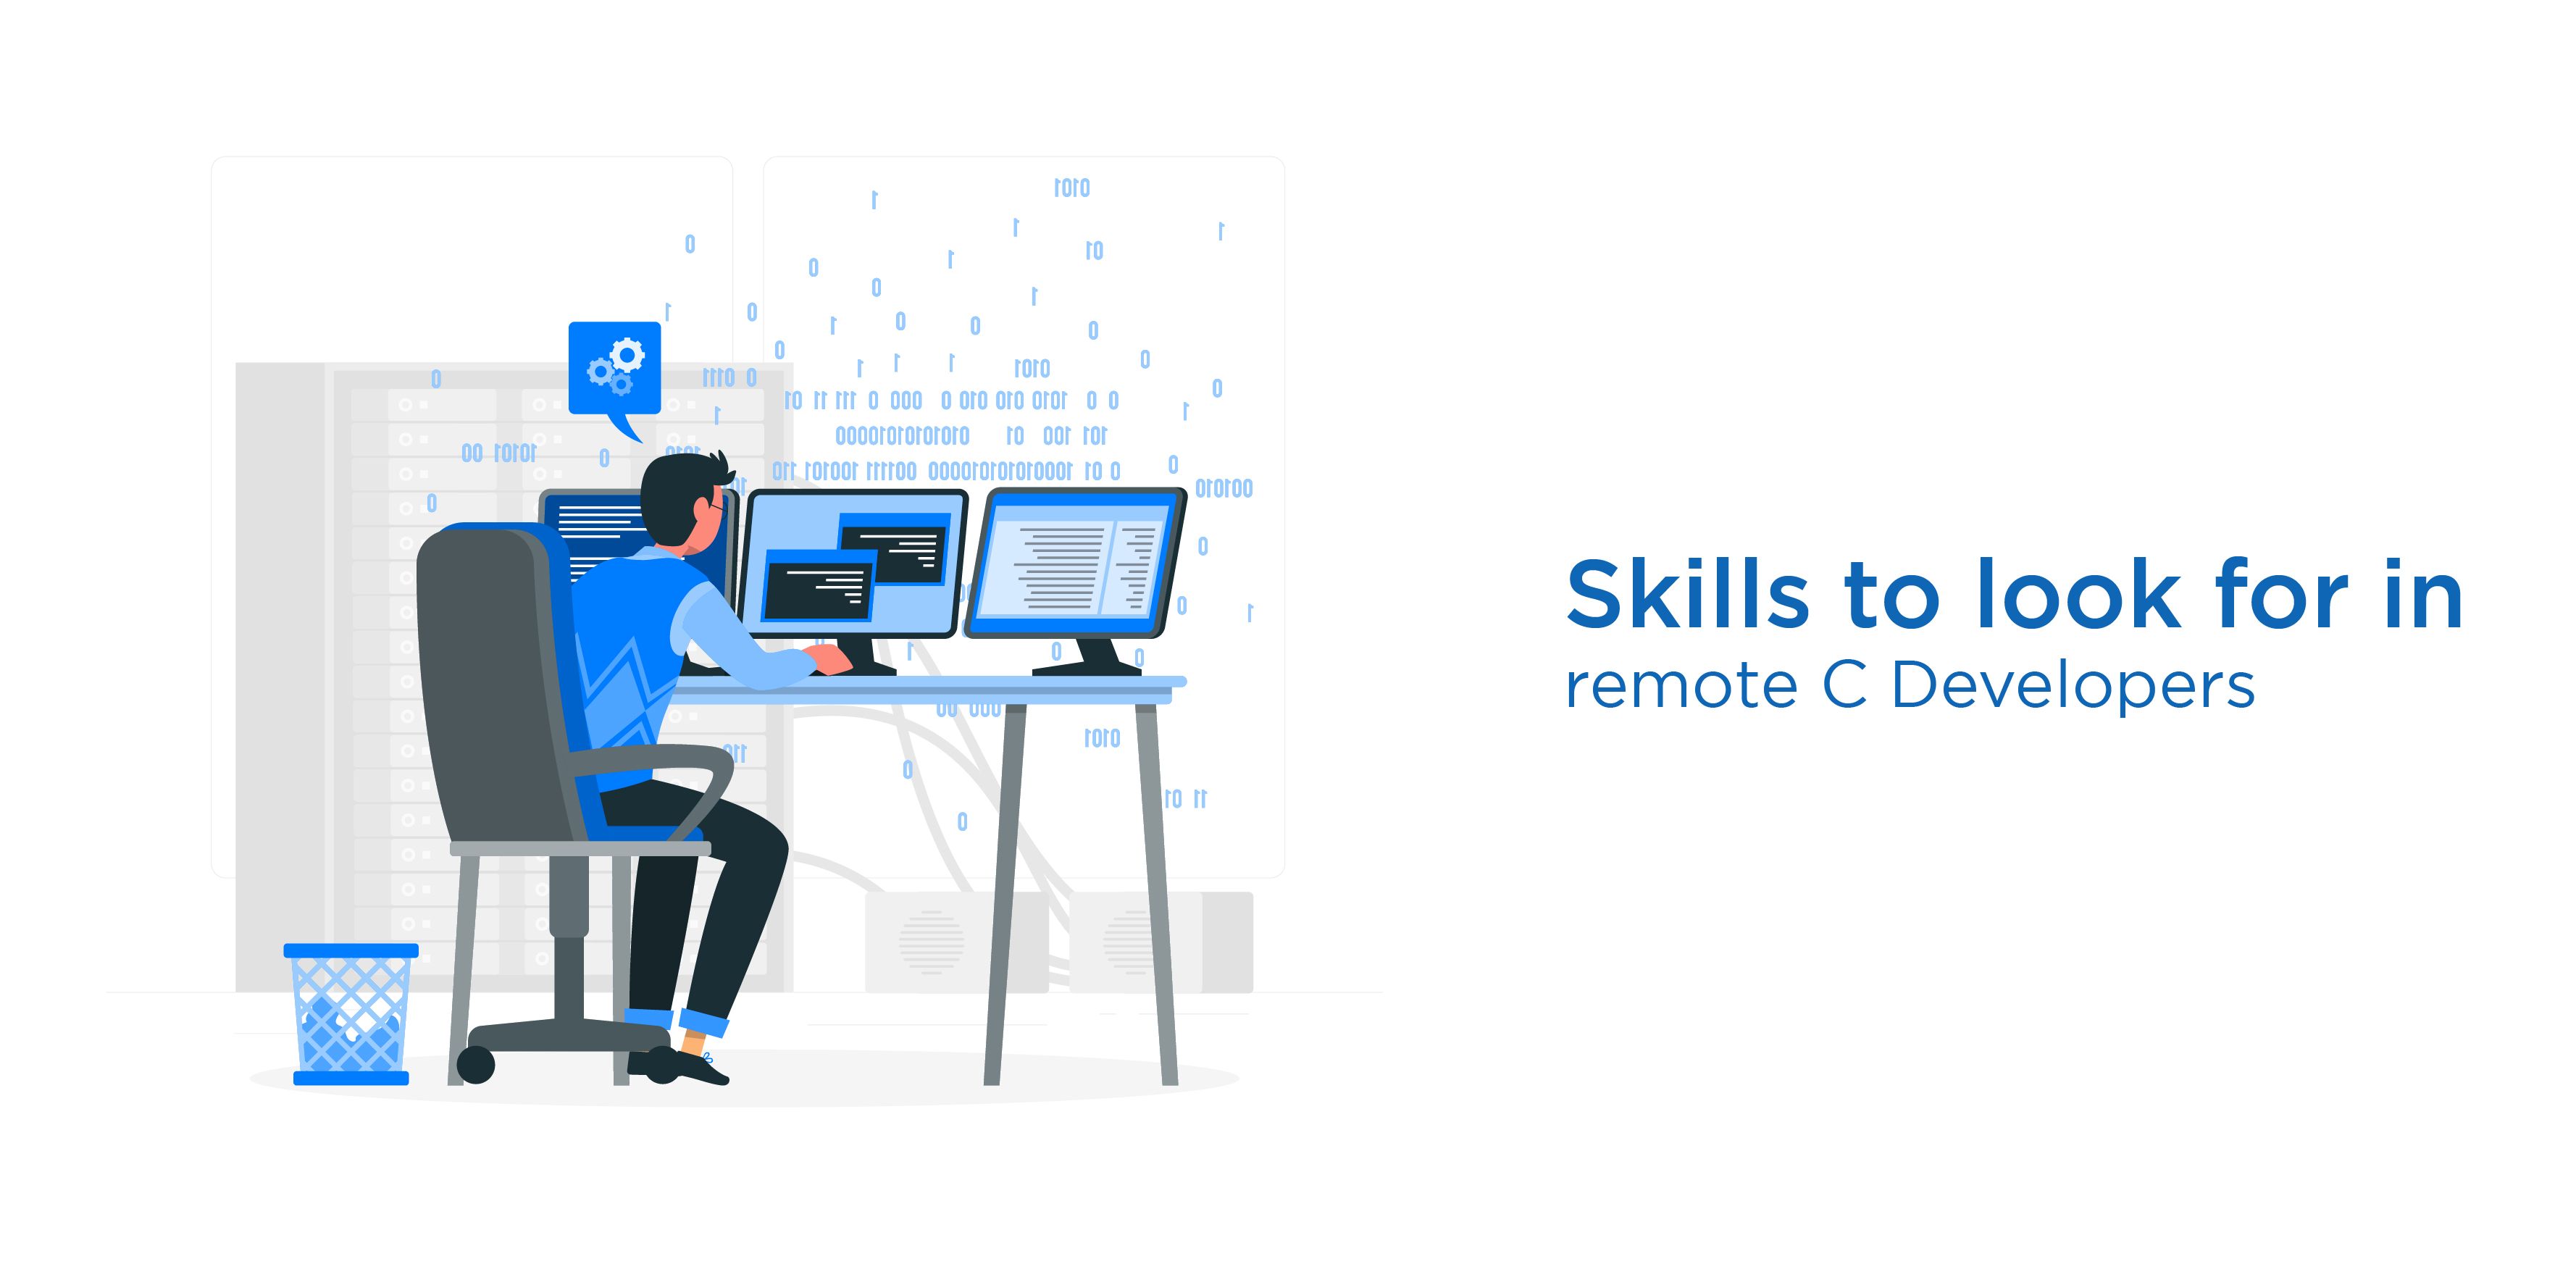 Skills to look for in remote C Developers 